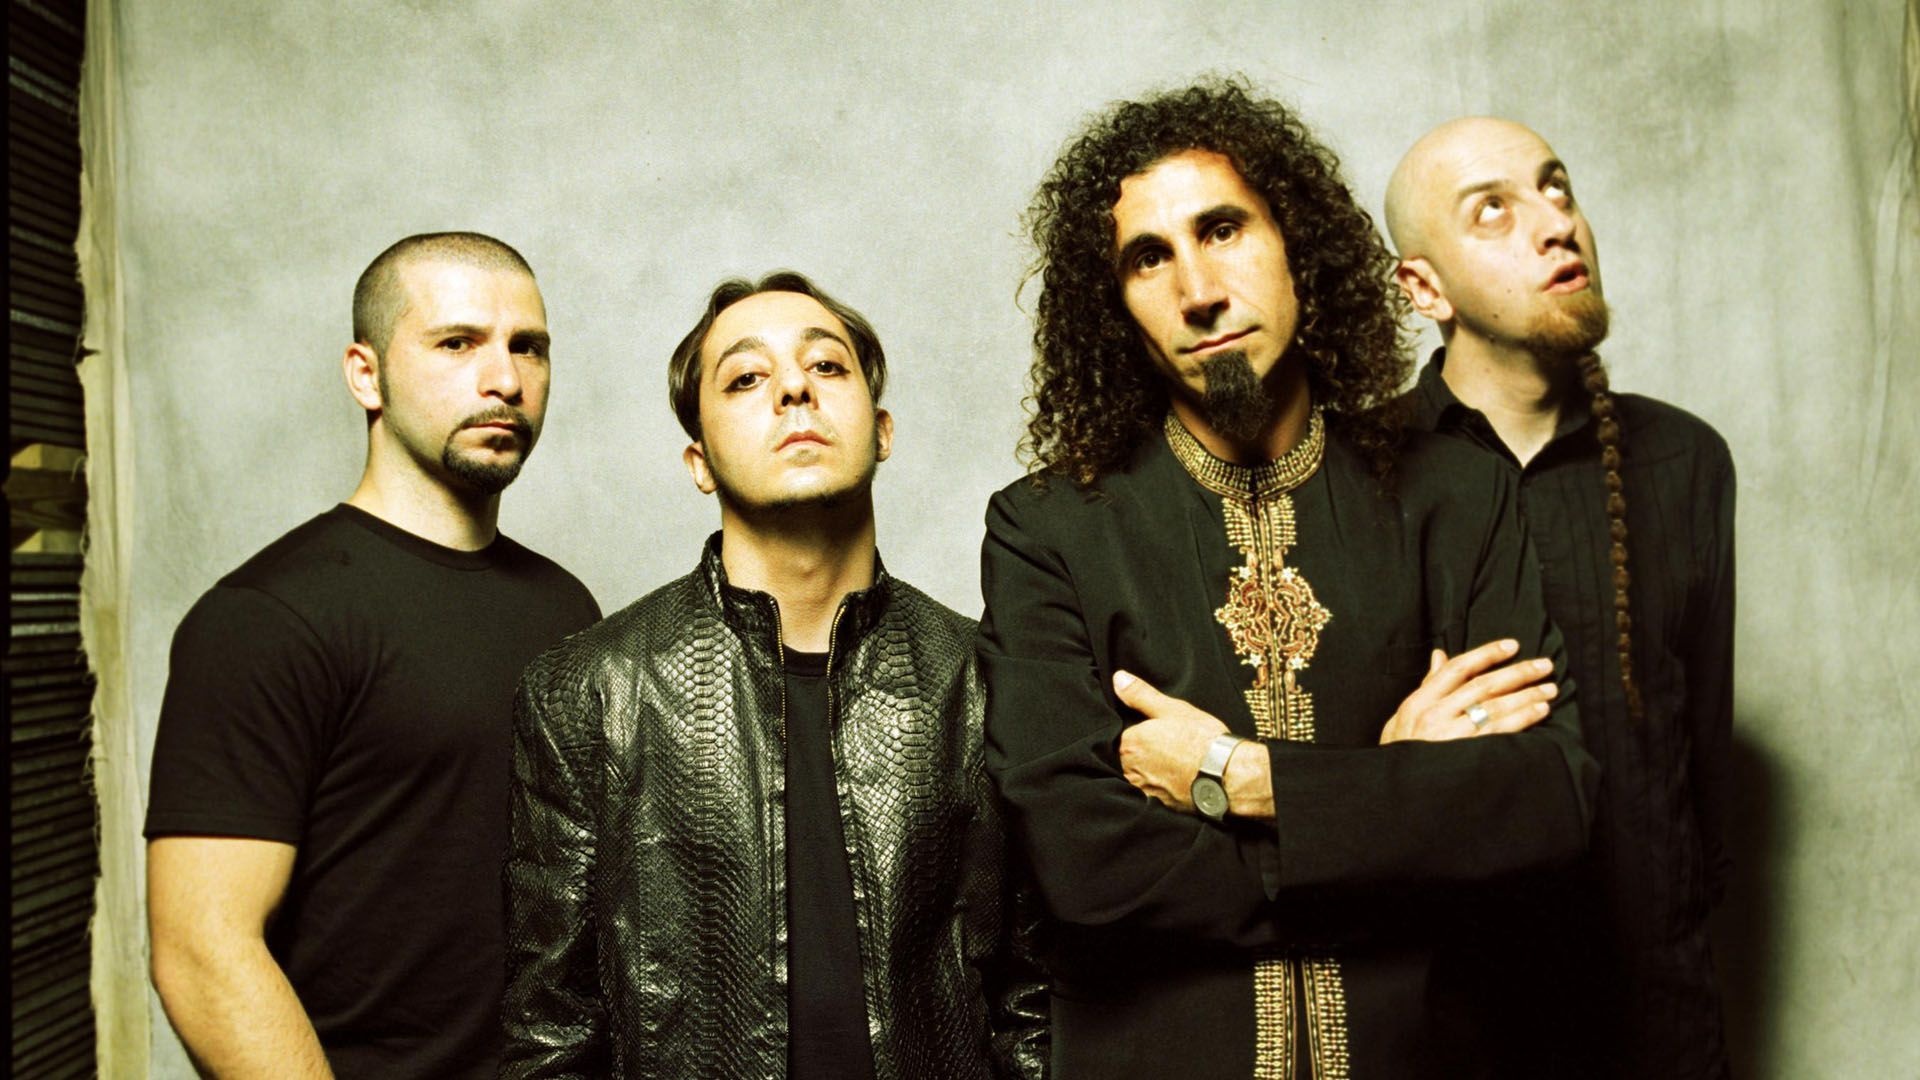 System Of A Down Wallpapers - Top Free System Of A Down Backgrounds 1920x1080